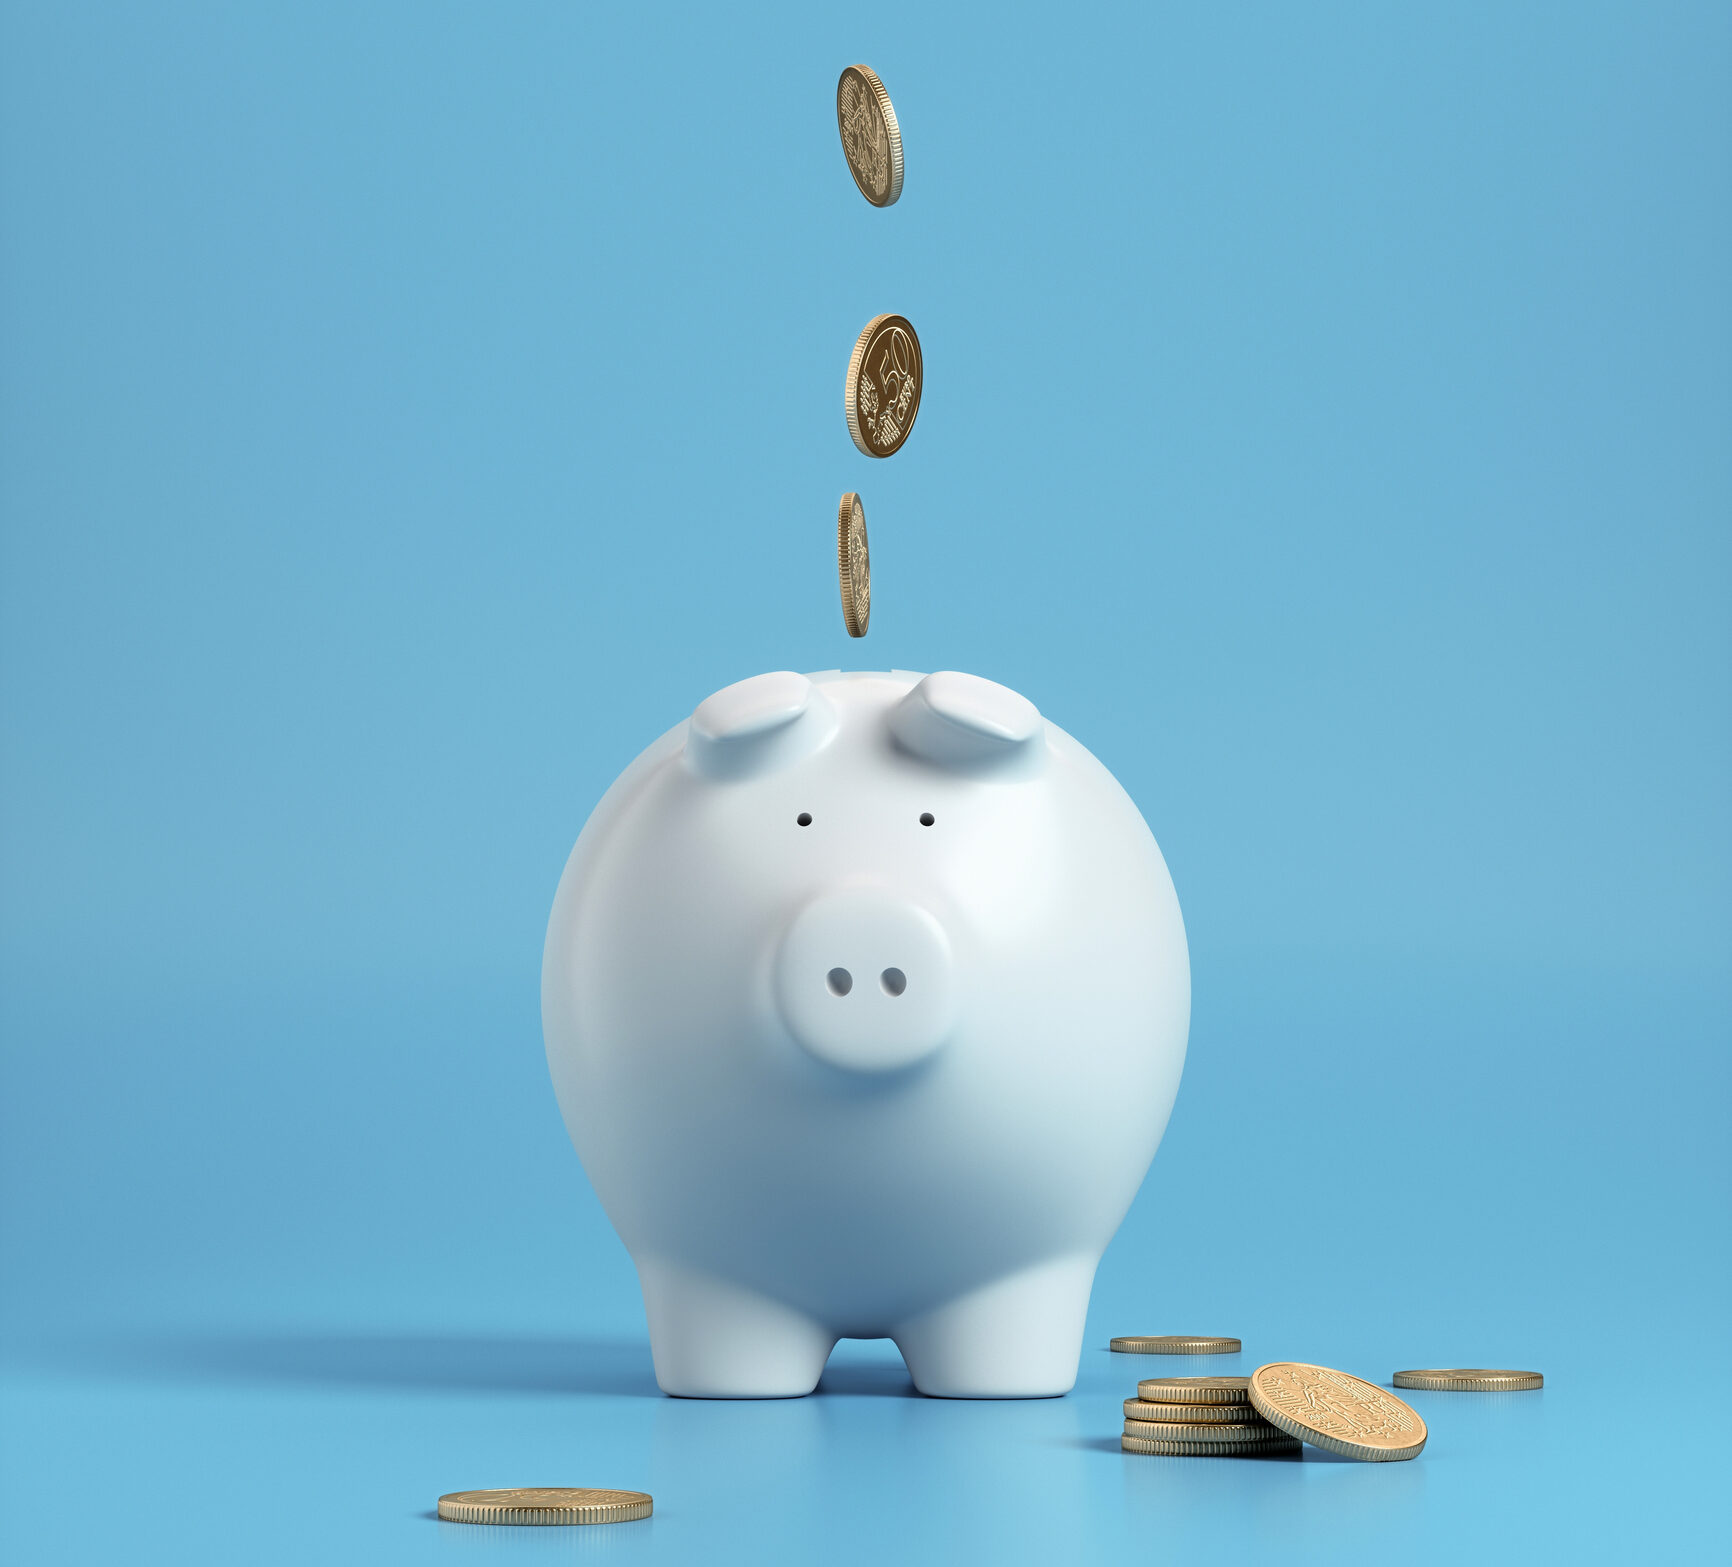 Falling coins in to a white piggy bank with a blue background